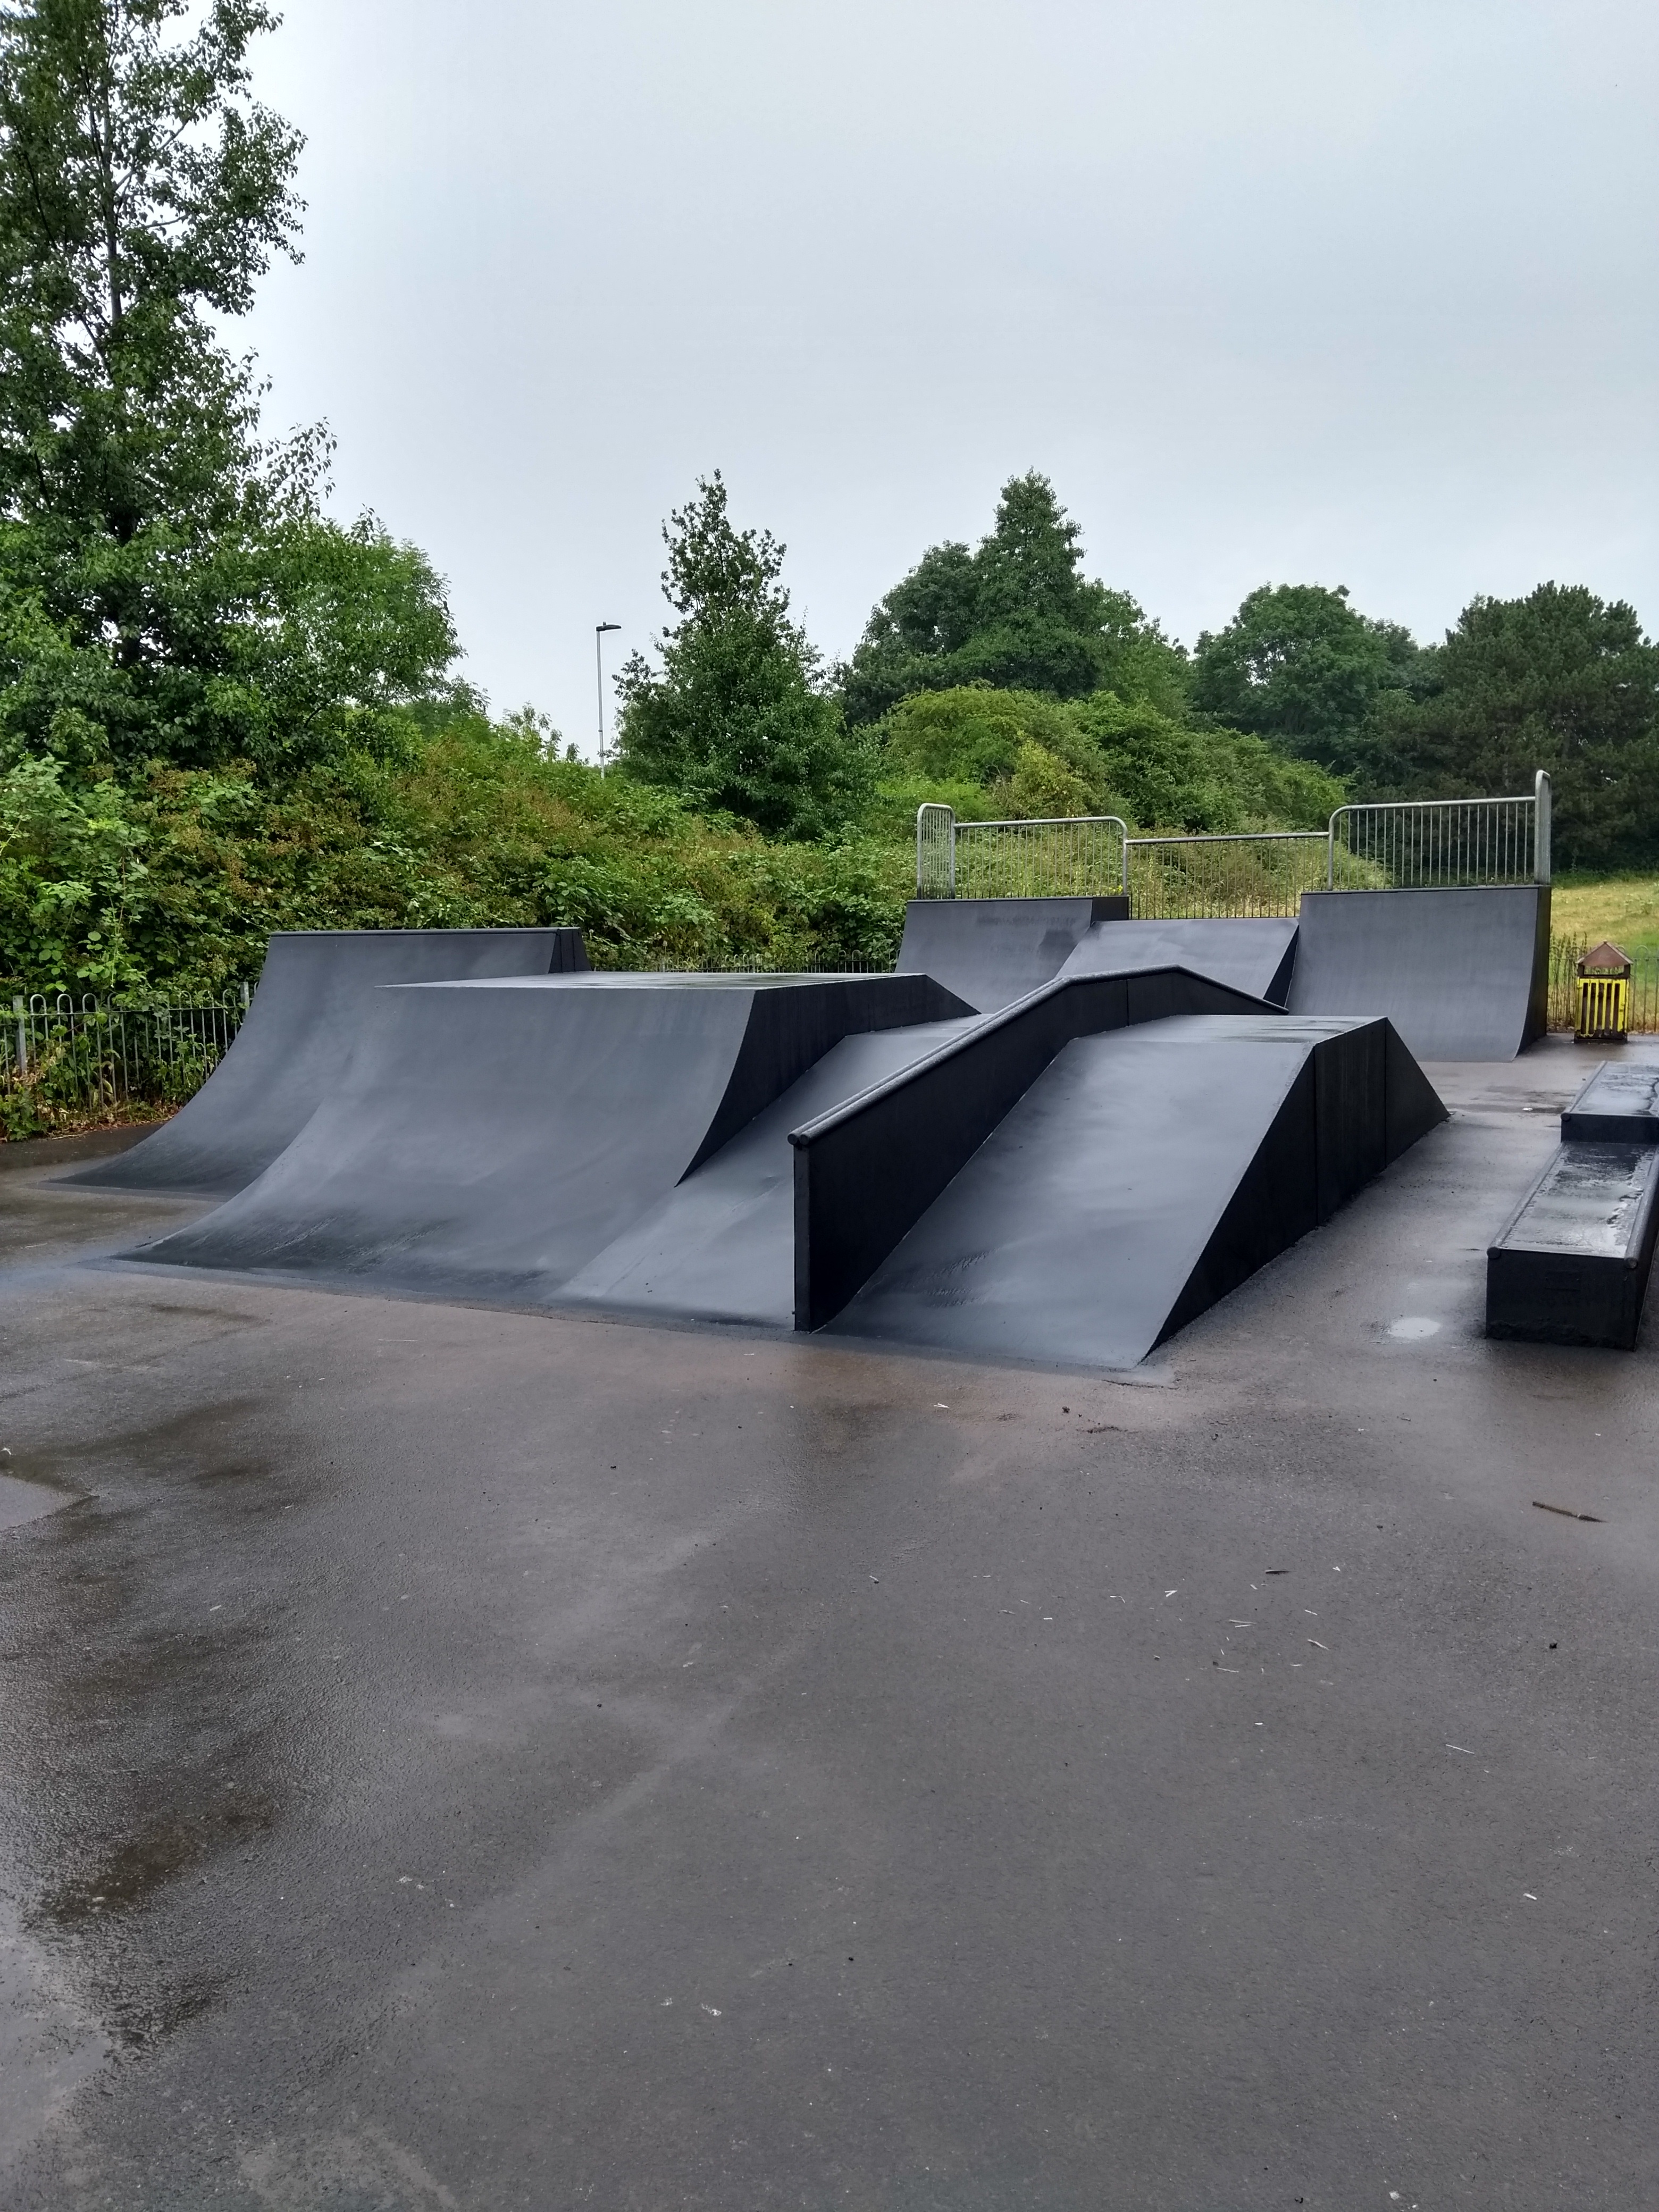 a view of the Skatepark